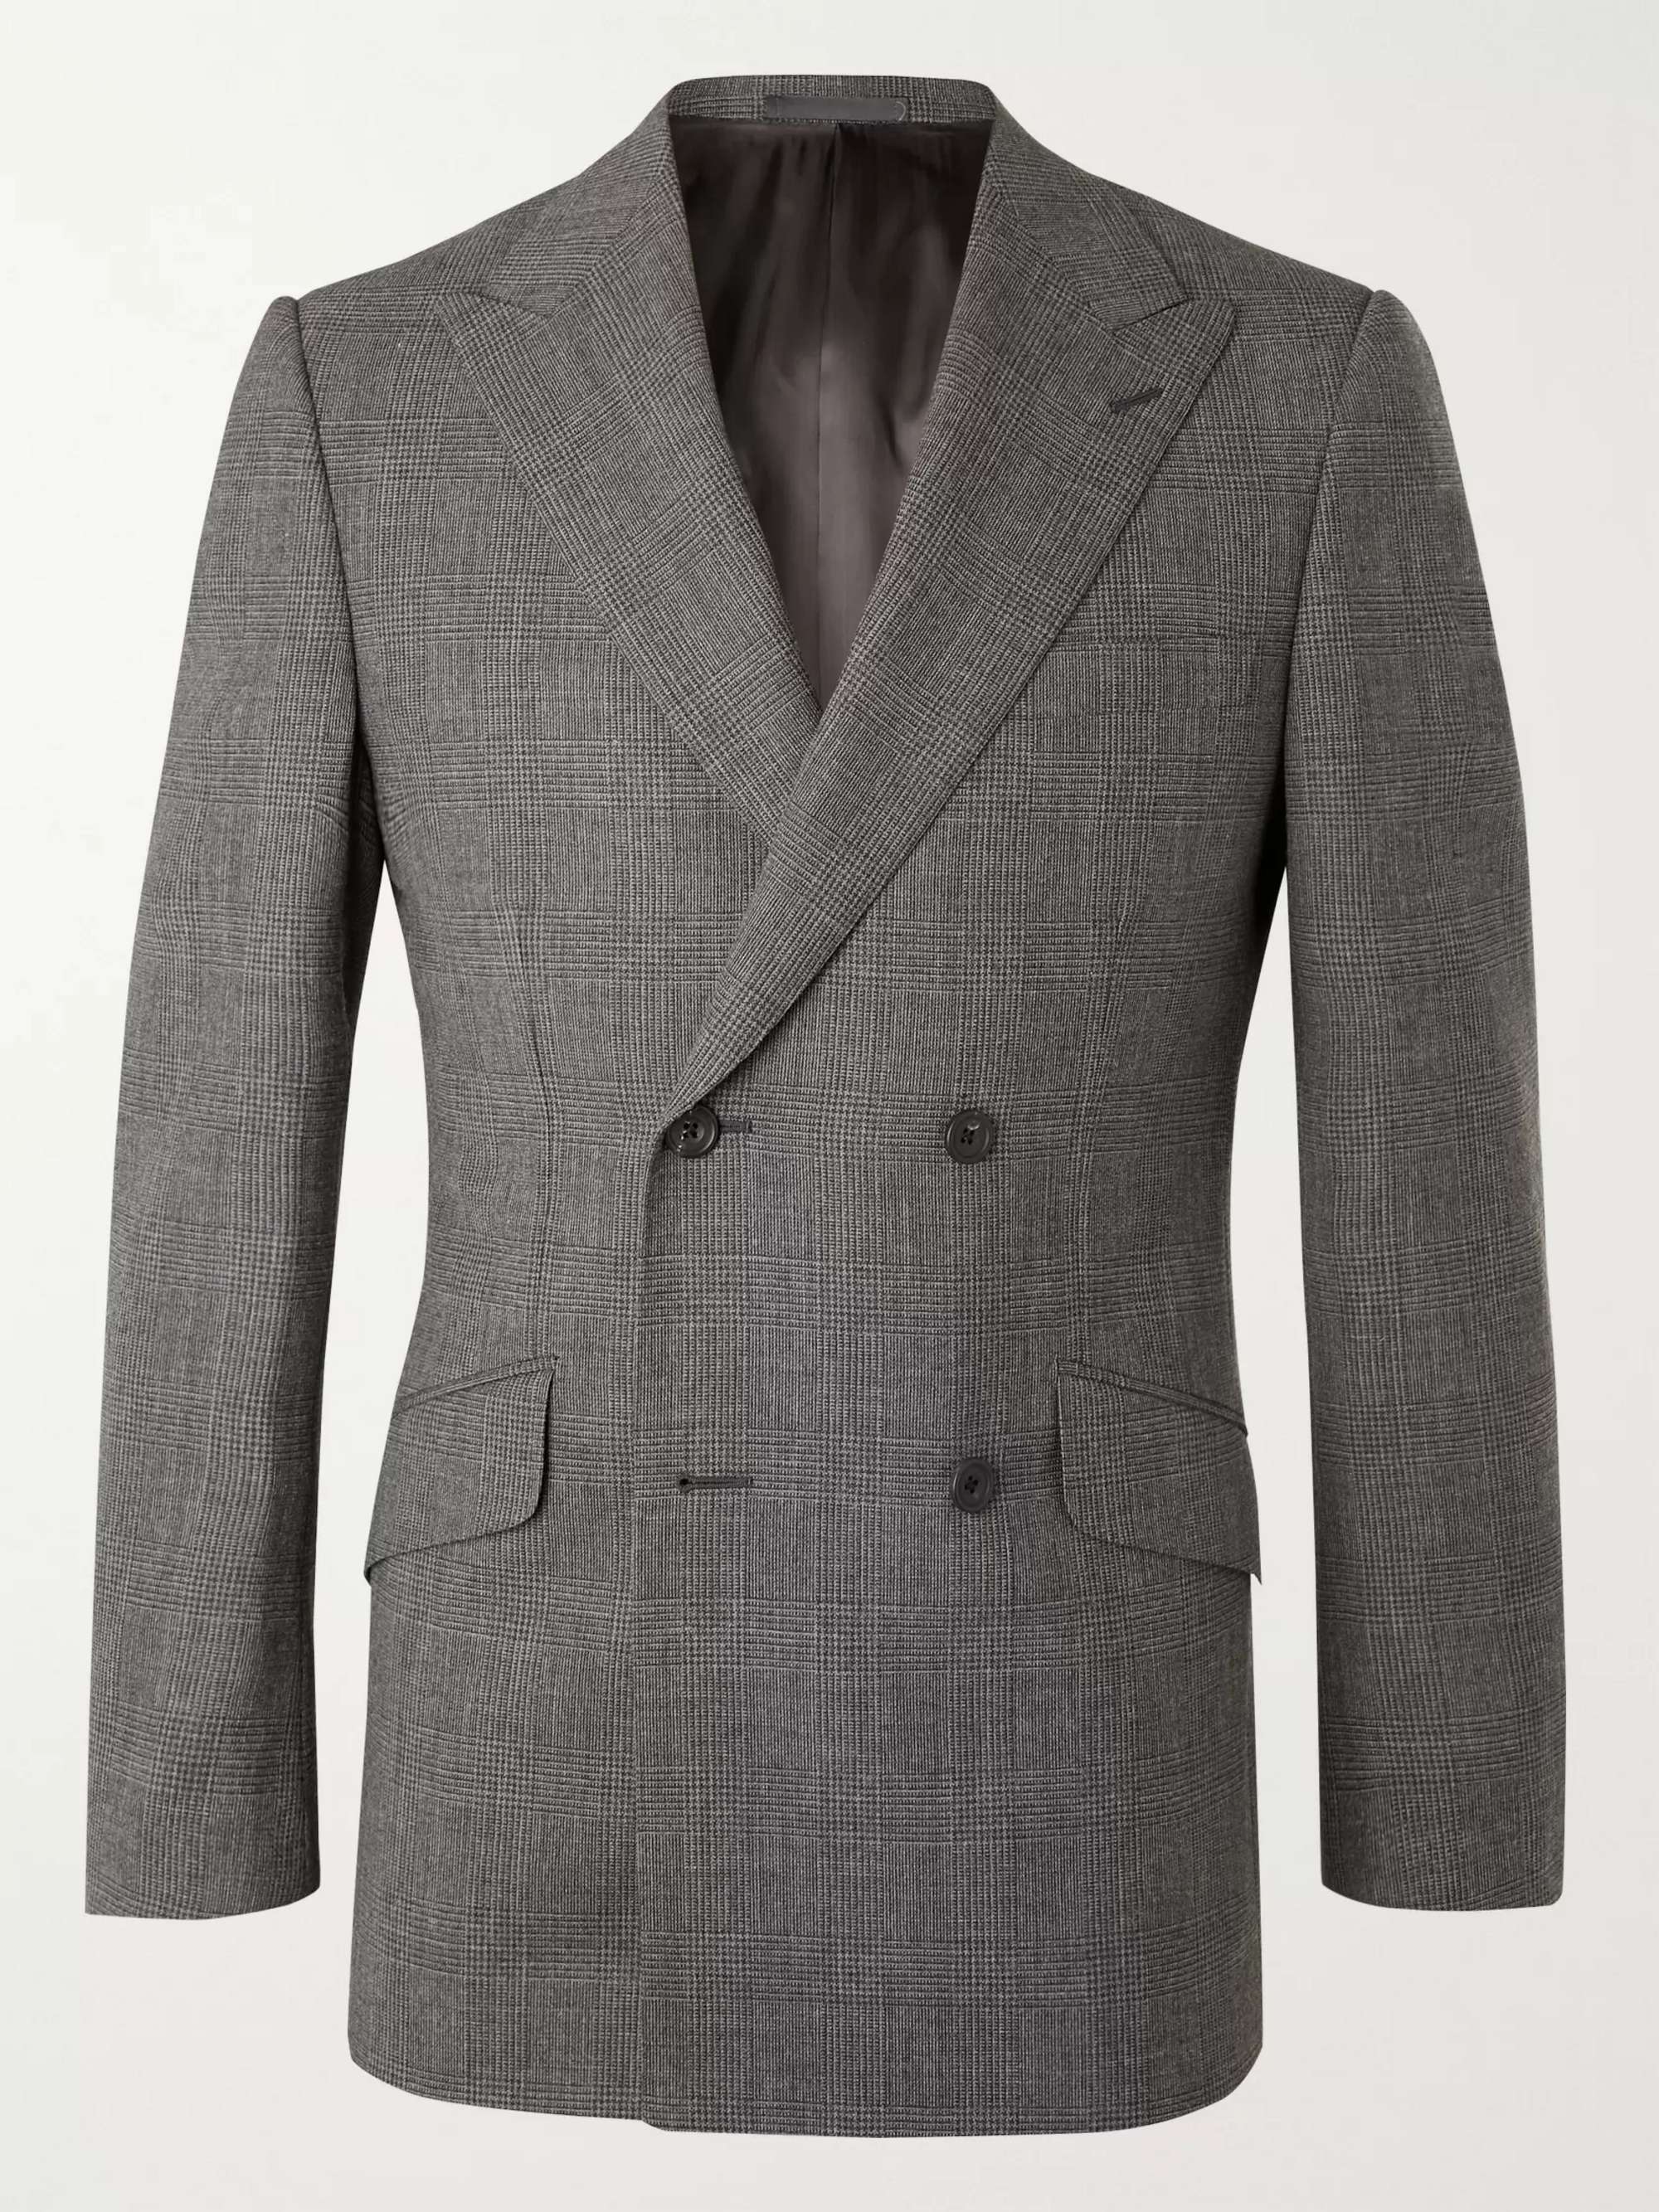 KINGSMAN Archie Reid Slim-Fit Double-Breasted Prince of Wales Checked Wool Suit Jacket